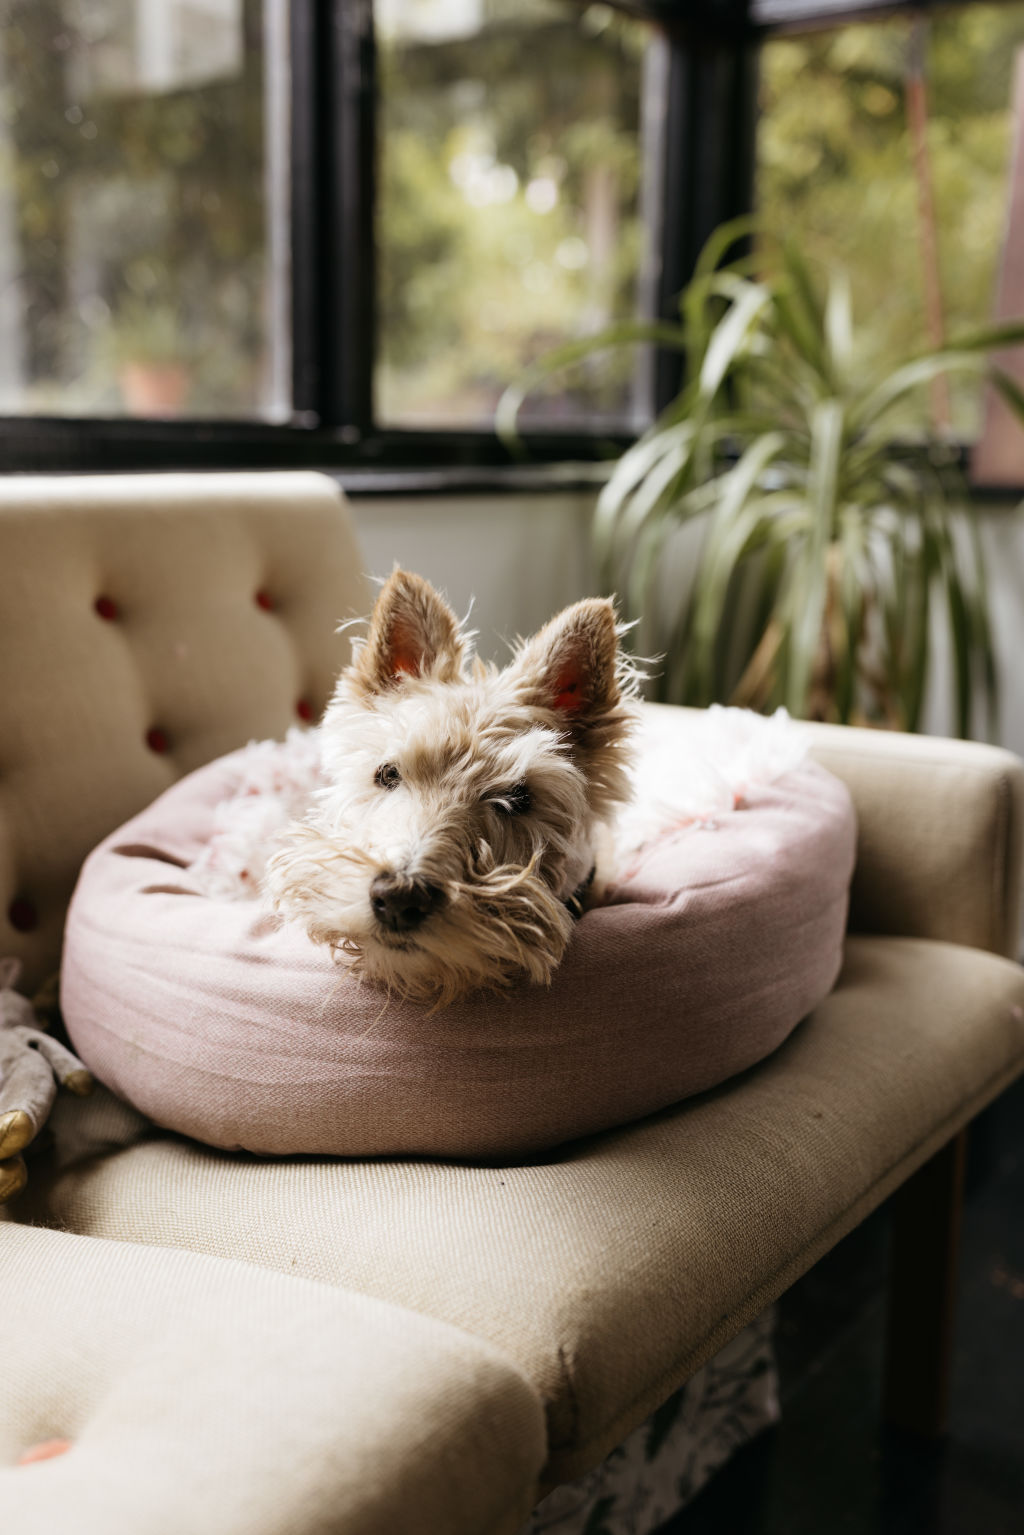 Yeow shares the home with her 10-year-old Scottish terrier Tim. Photo: Dan Evans